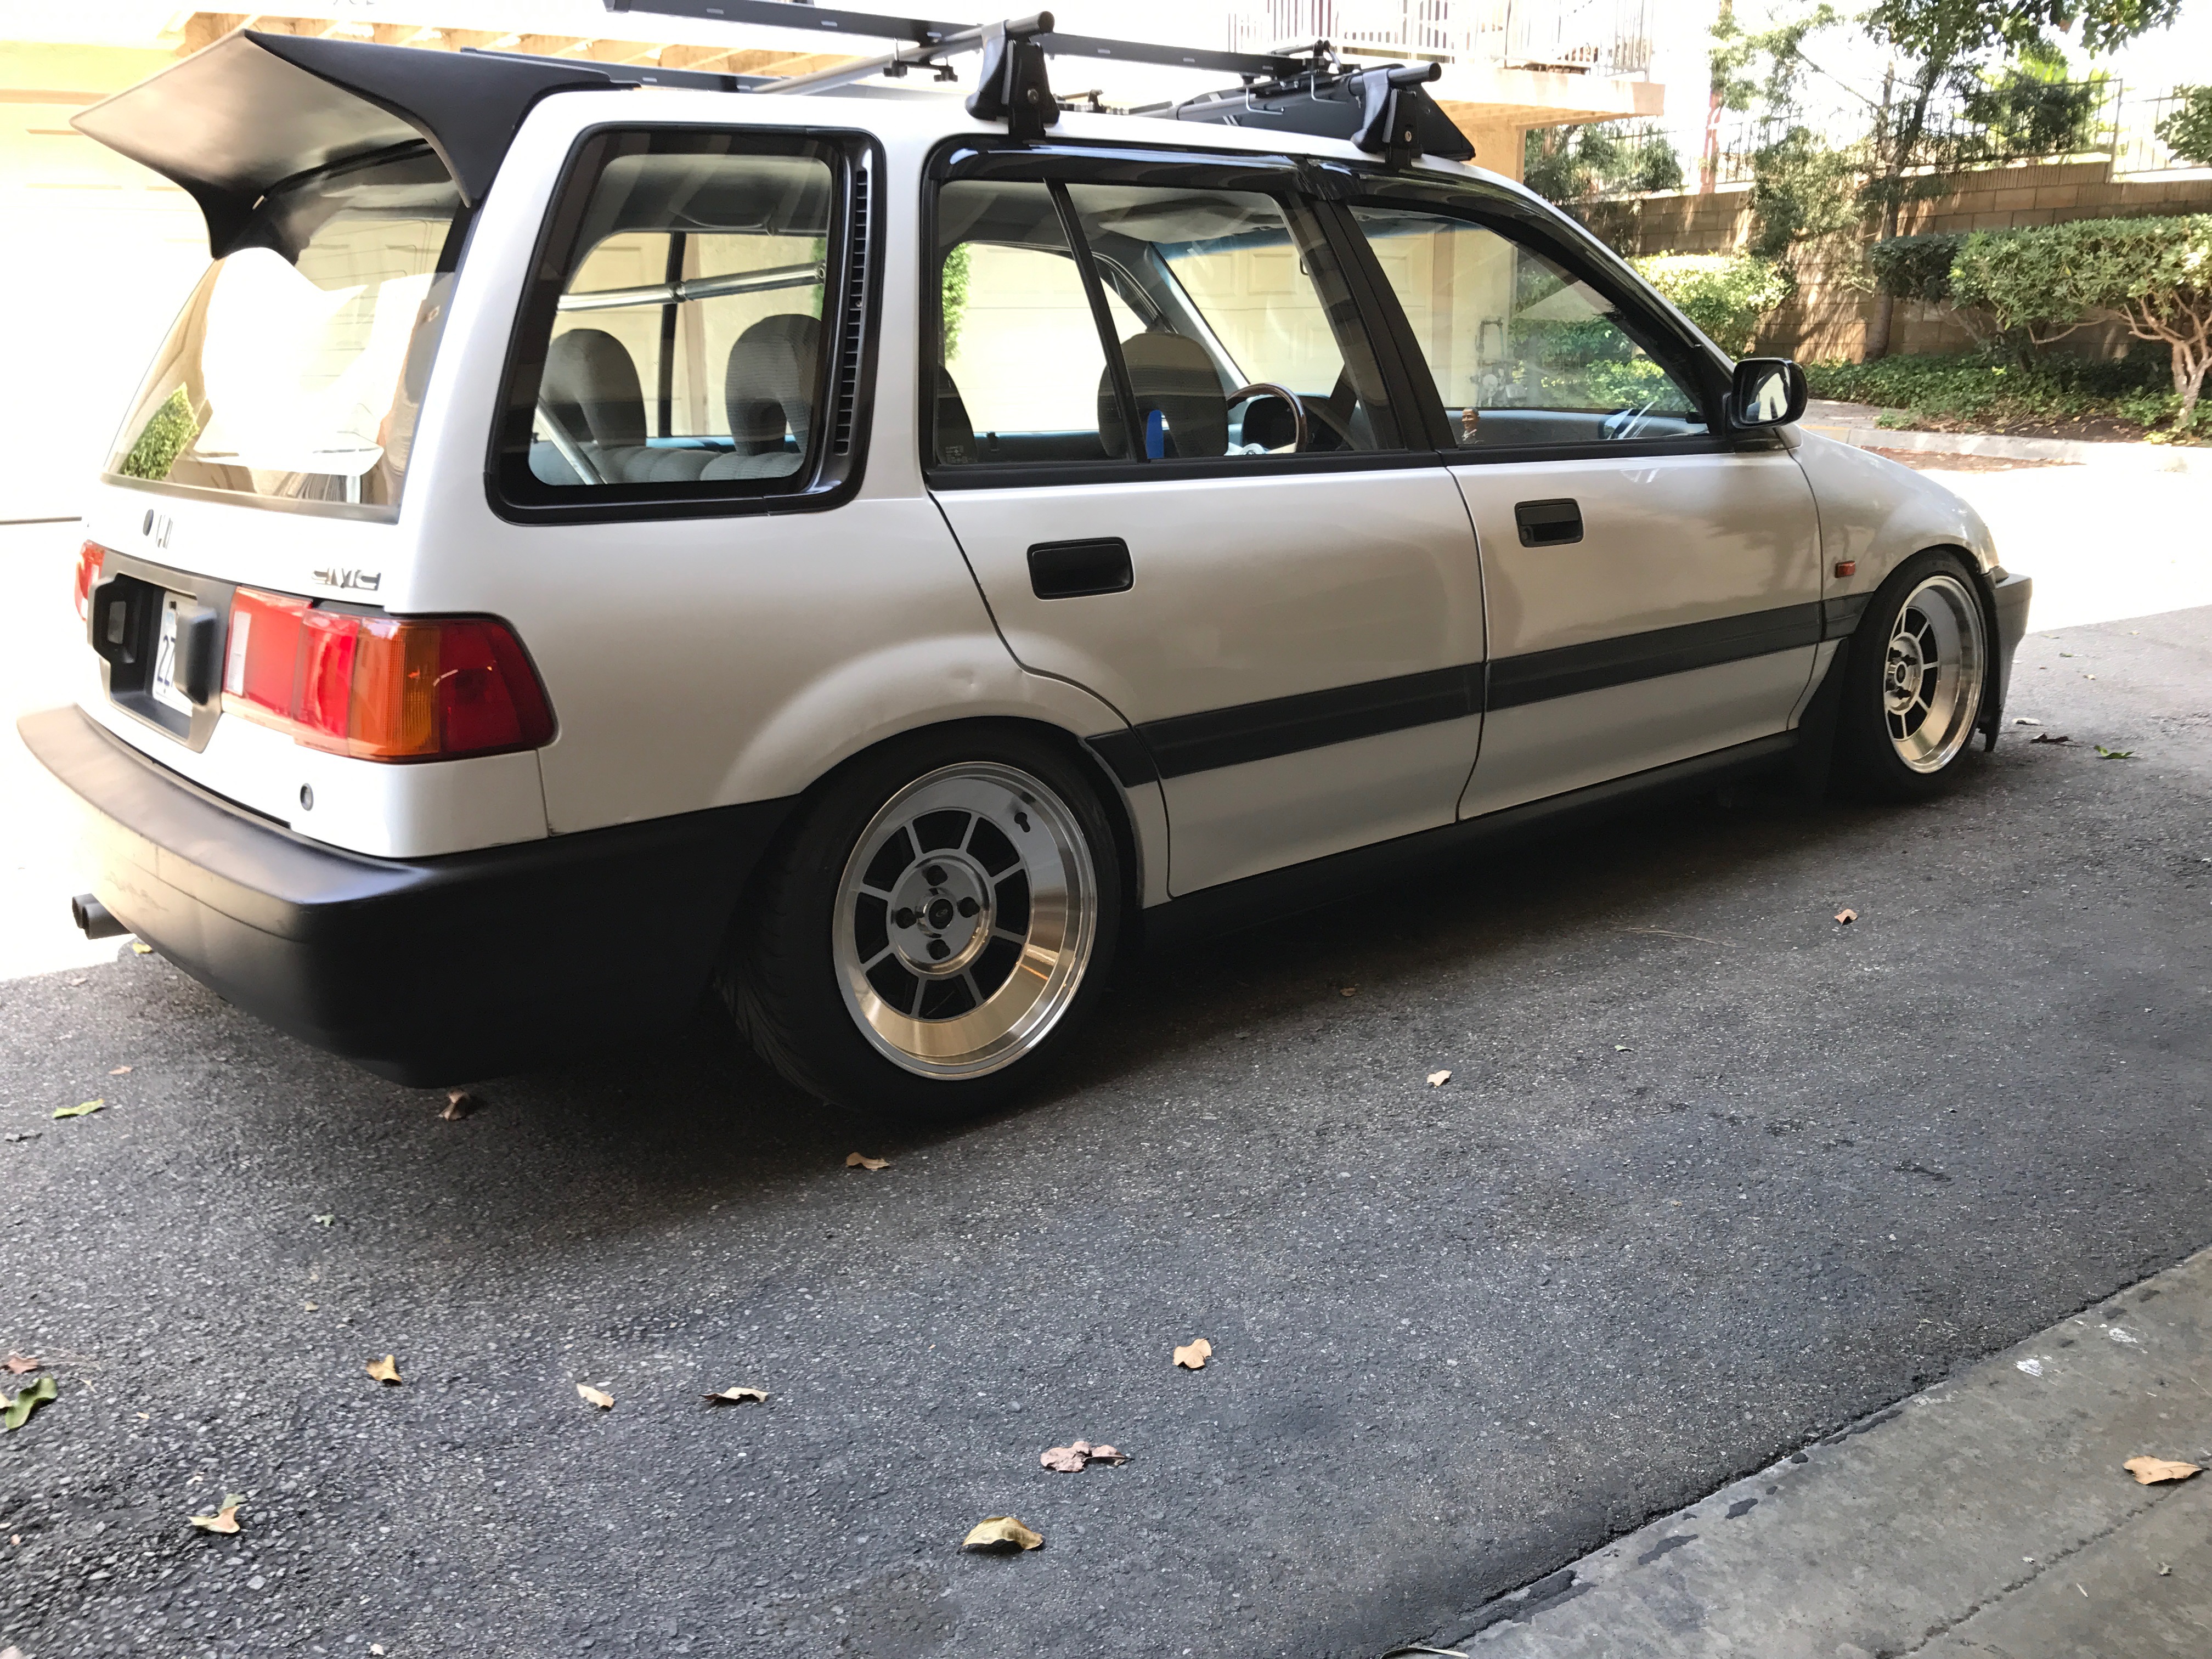 Honda Civic Ef Wagon For Sale - Cars Trend Today